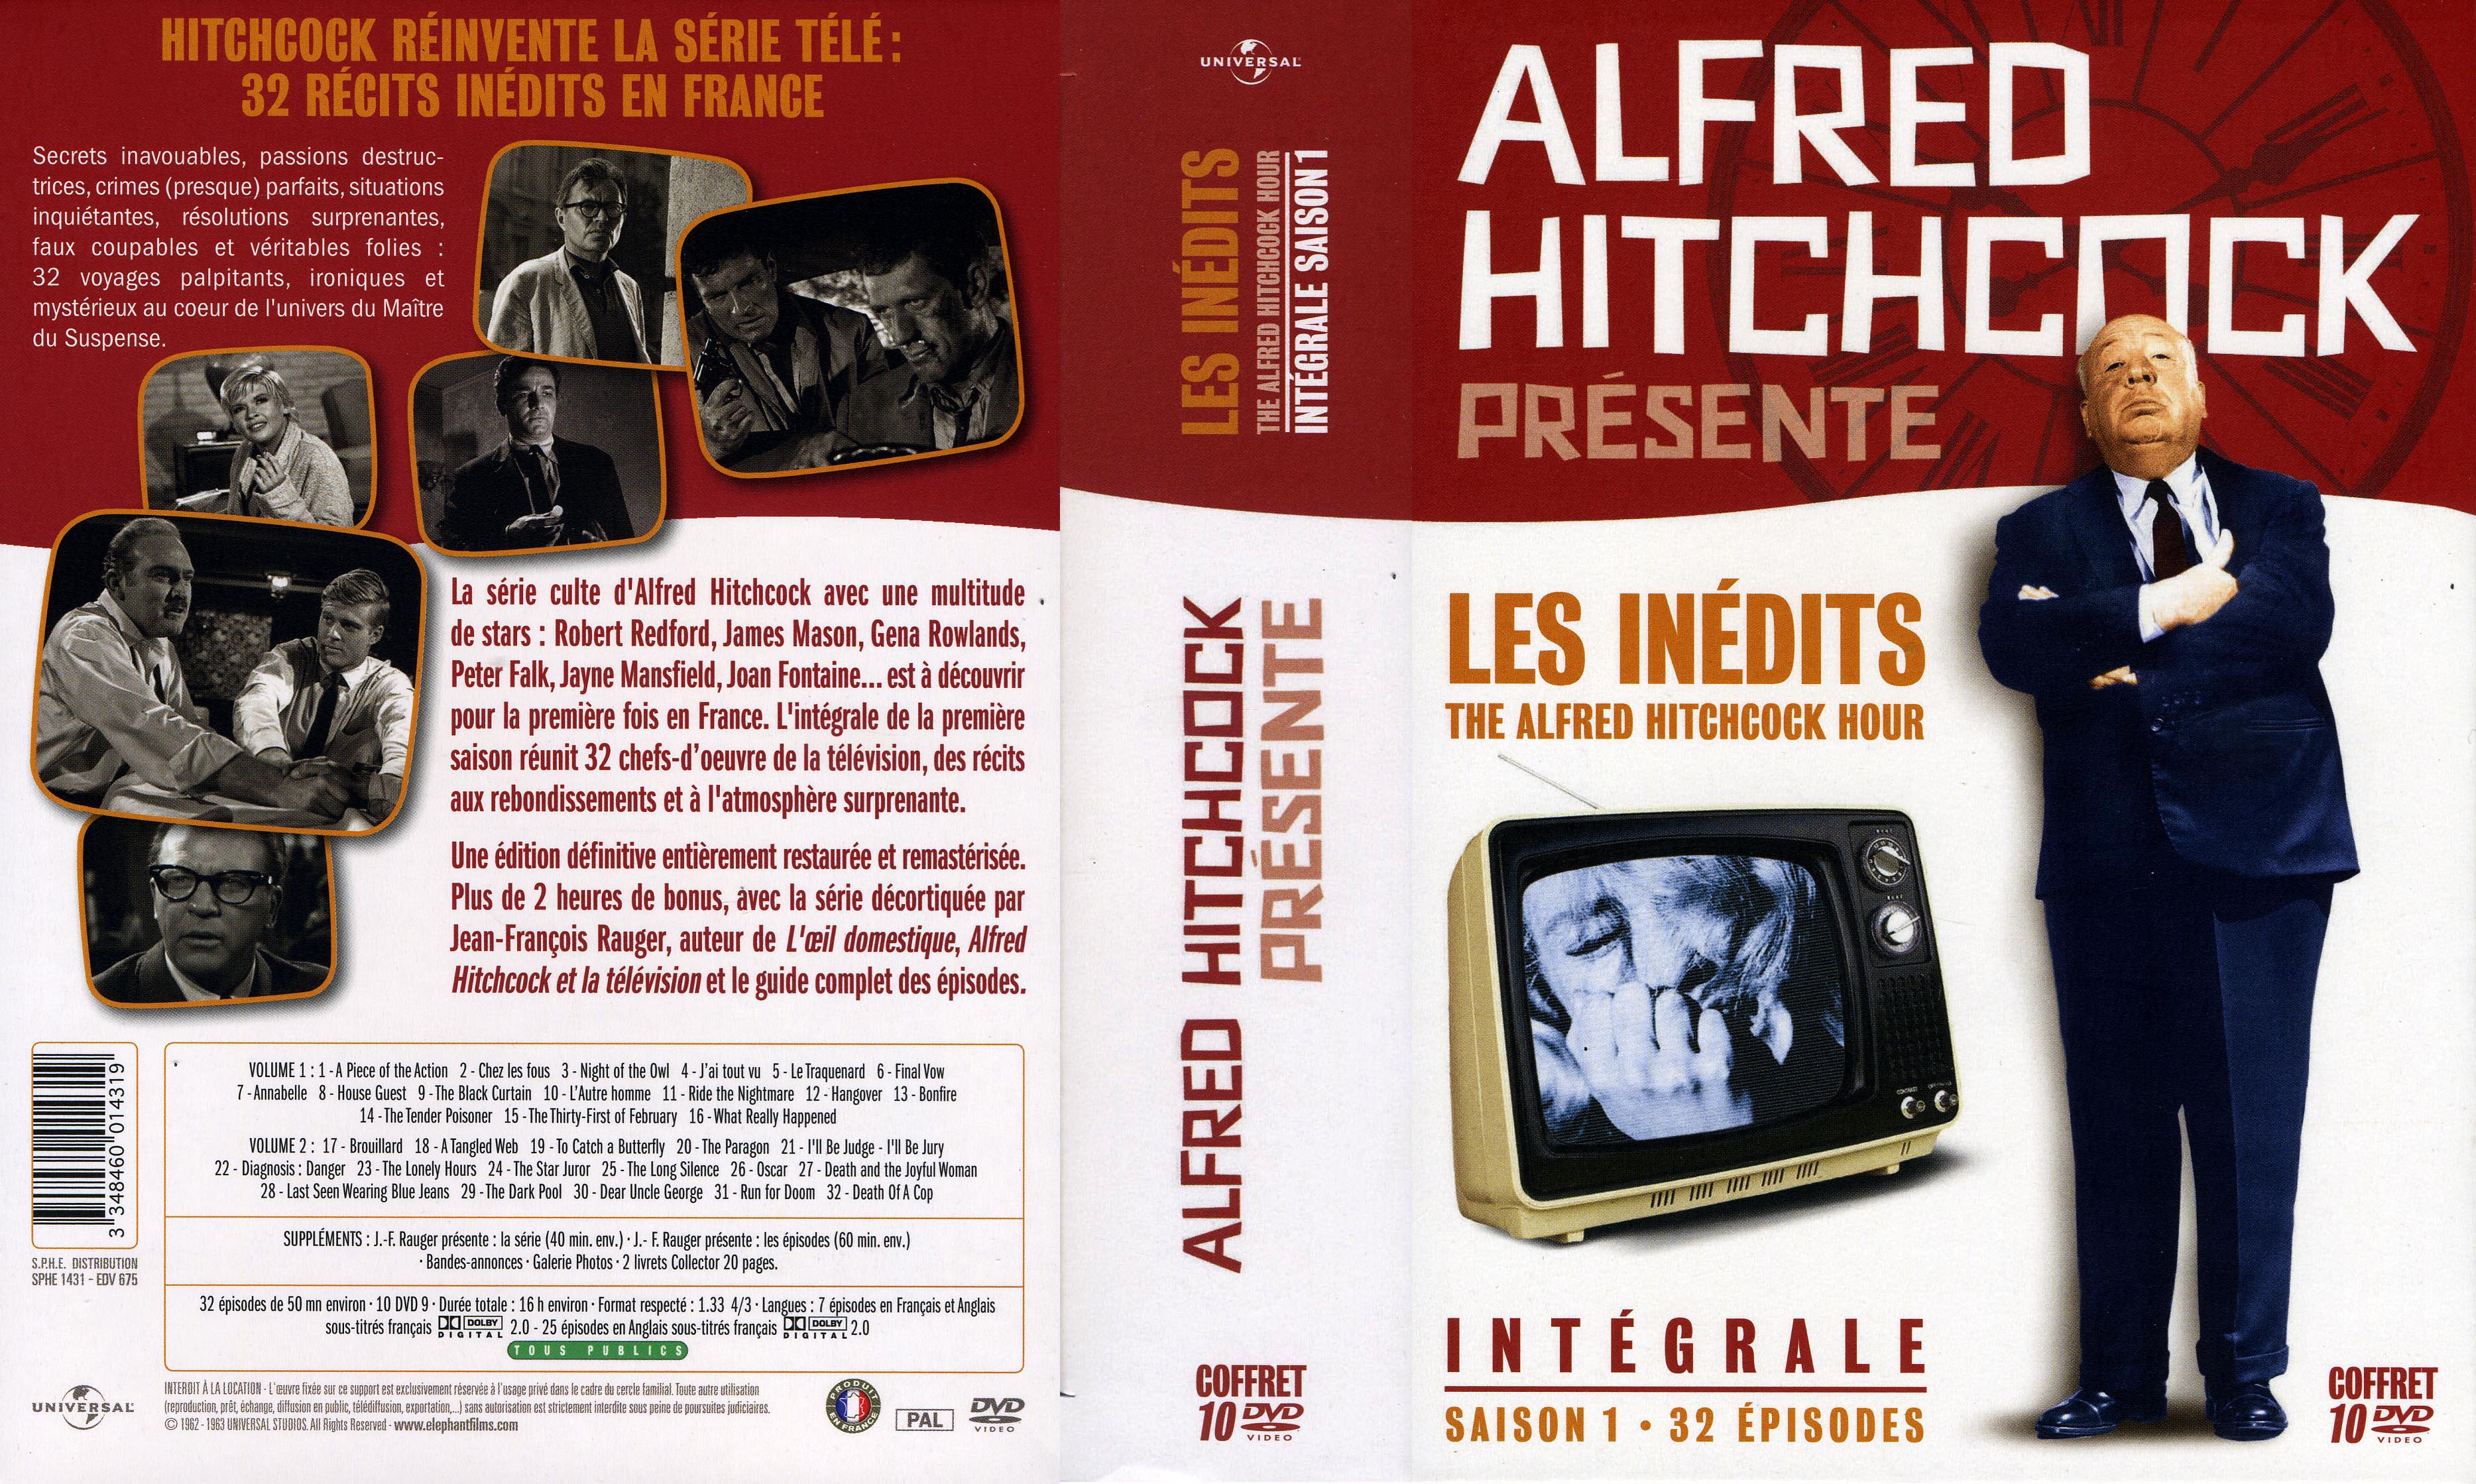 Alfred hitchcock hour annabel